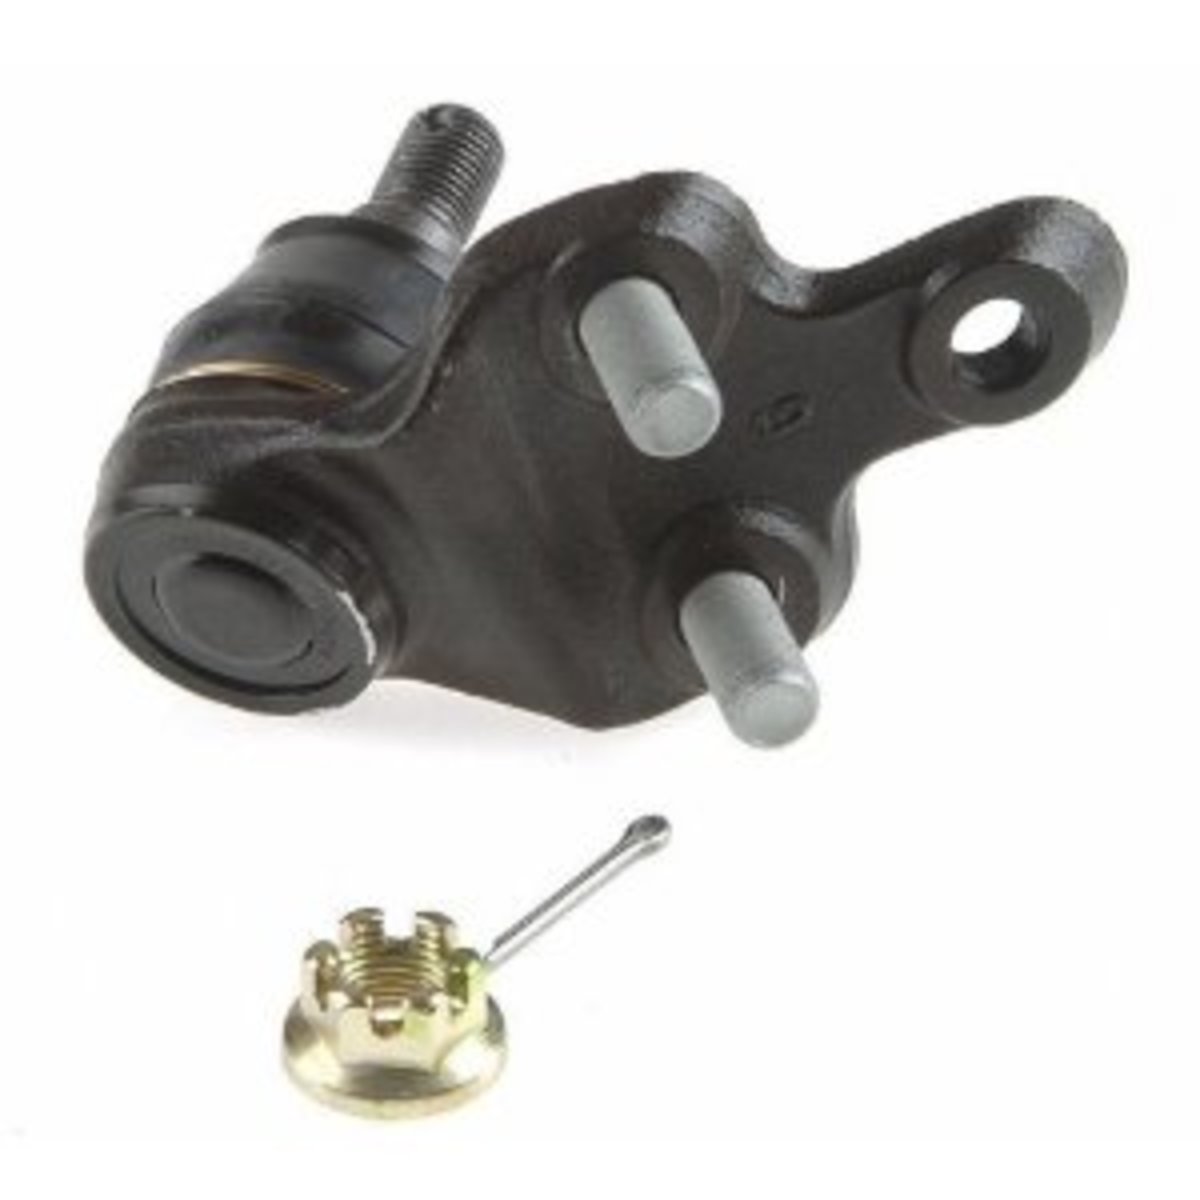 Toyota Camry Ball Joint Replacement